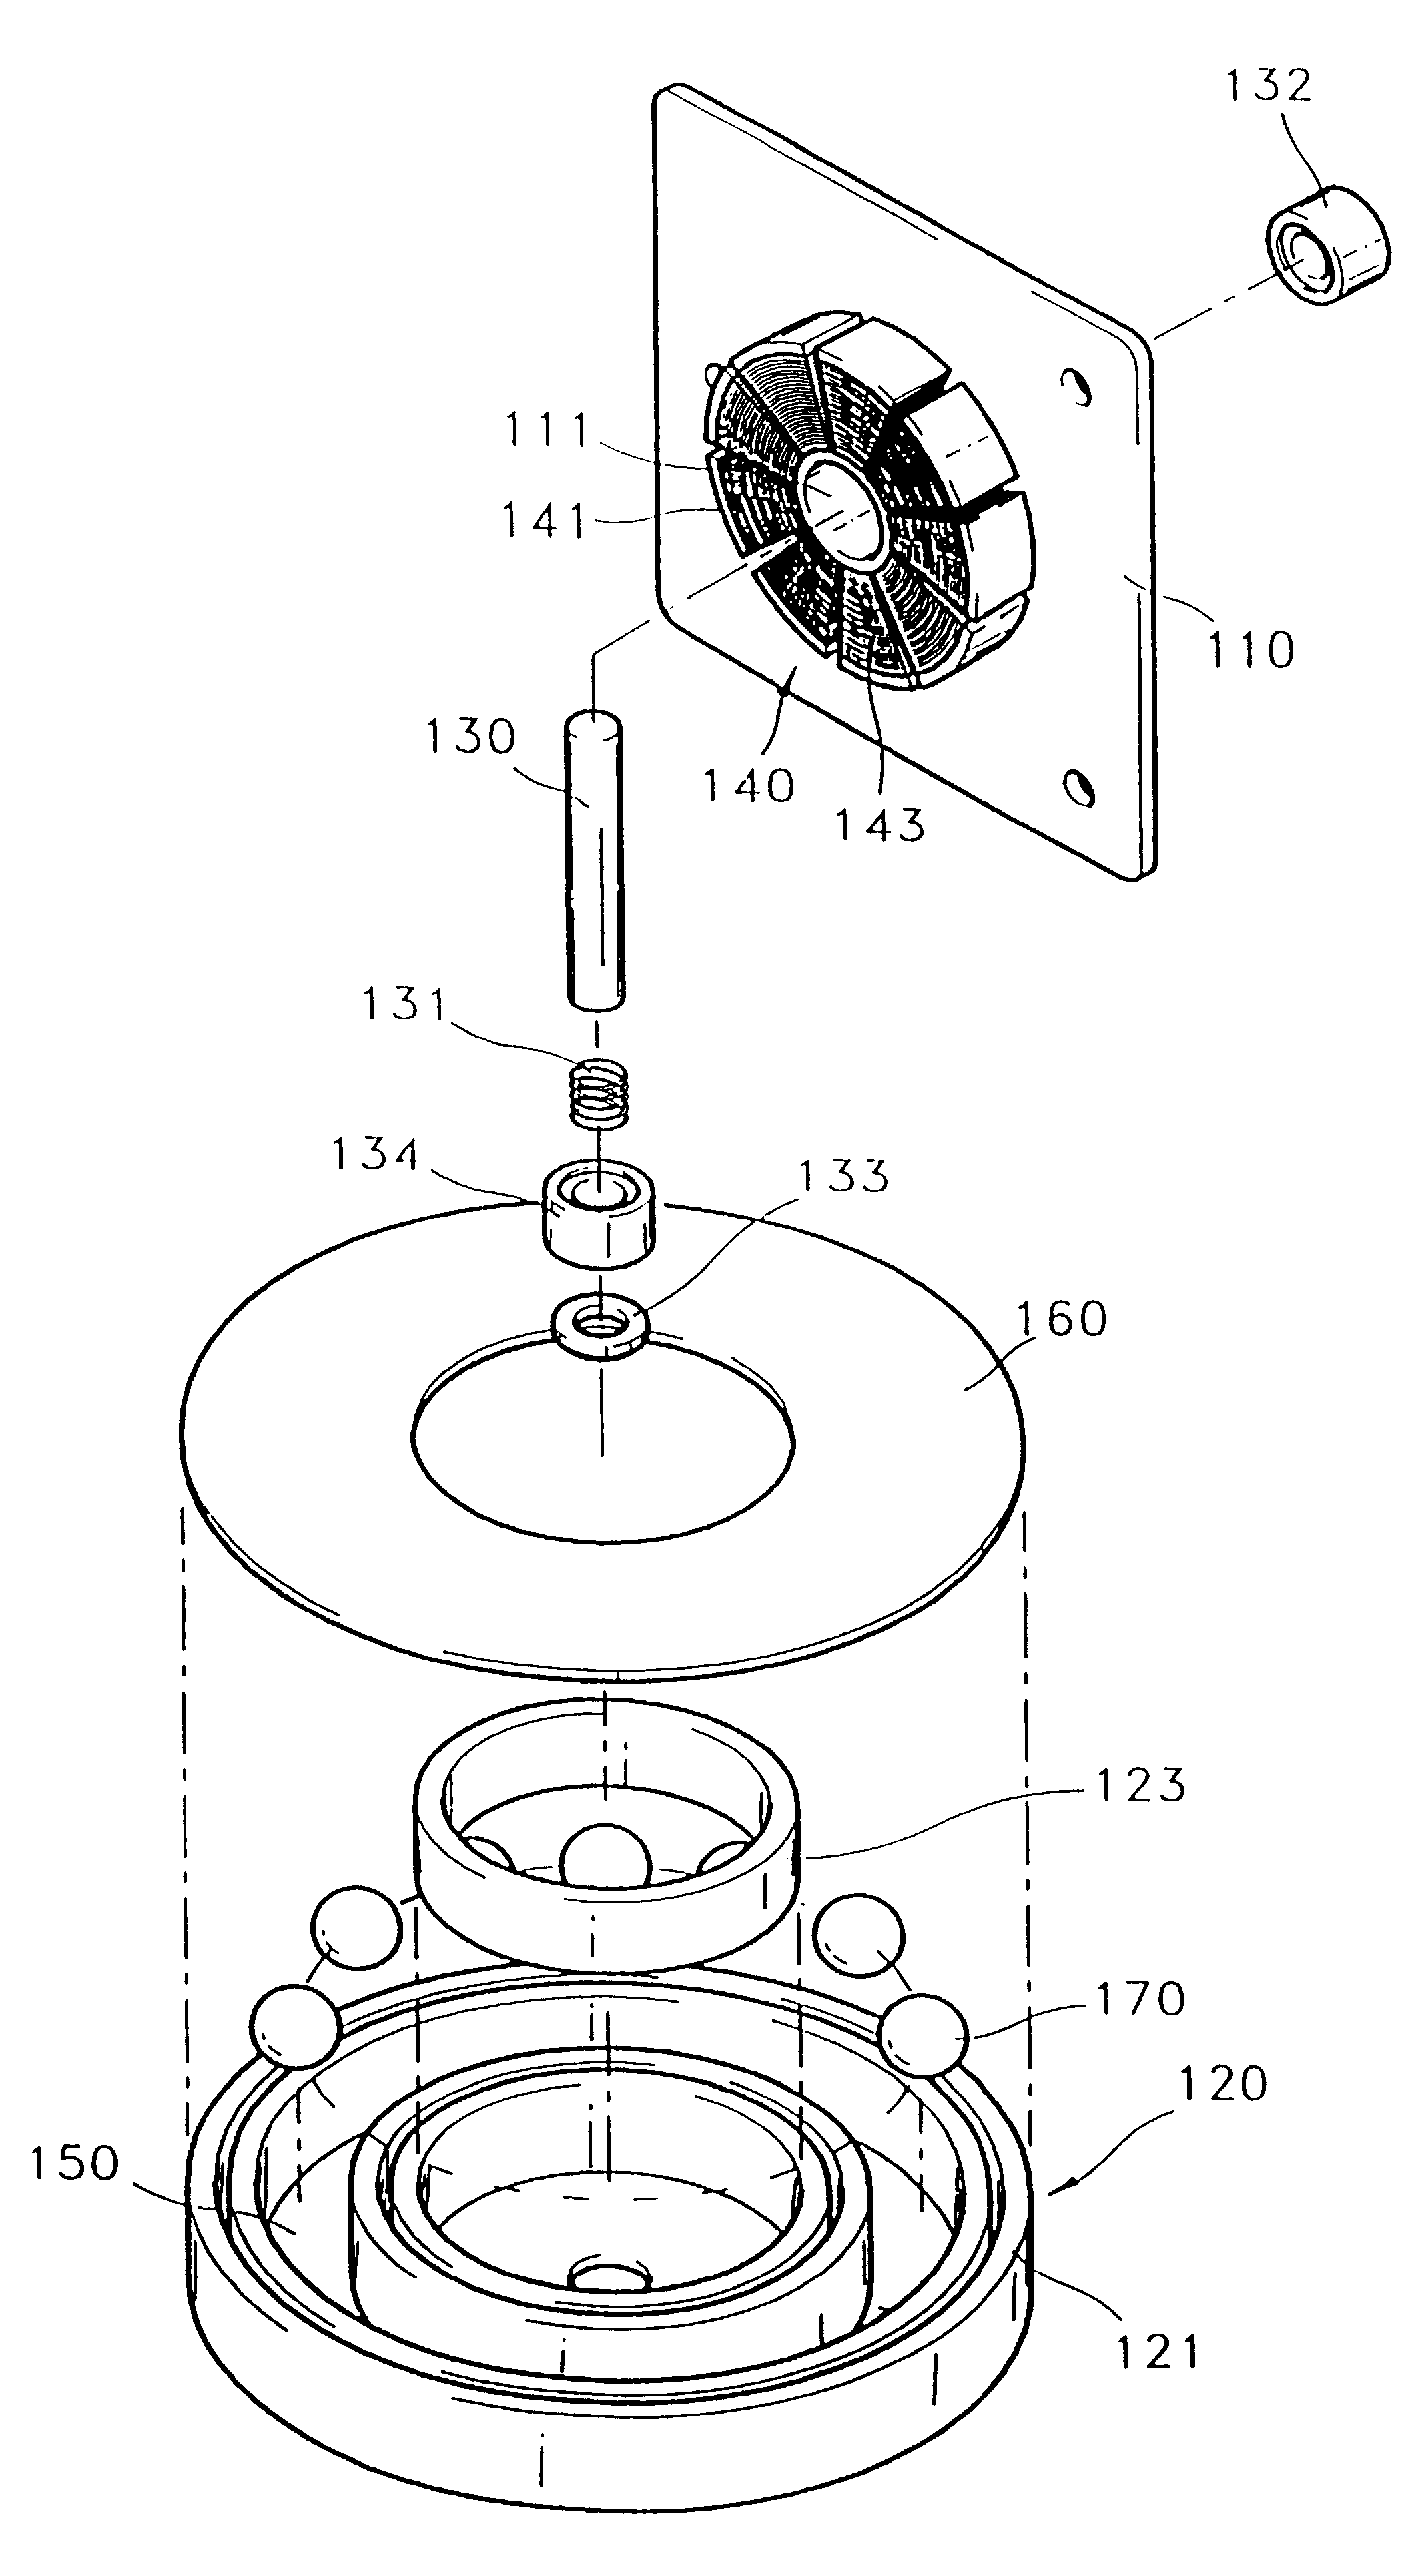 Disk player, and turntable incorporating self-compensating dynamic balancer, clamper incorporating self-compensating dynamic balancer and spindle motor incorporating self-compensating dynamic balancer adopted for disk player